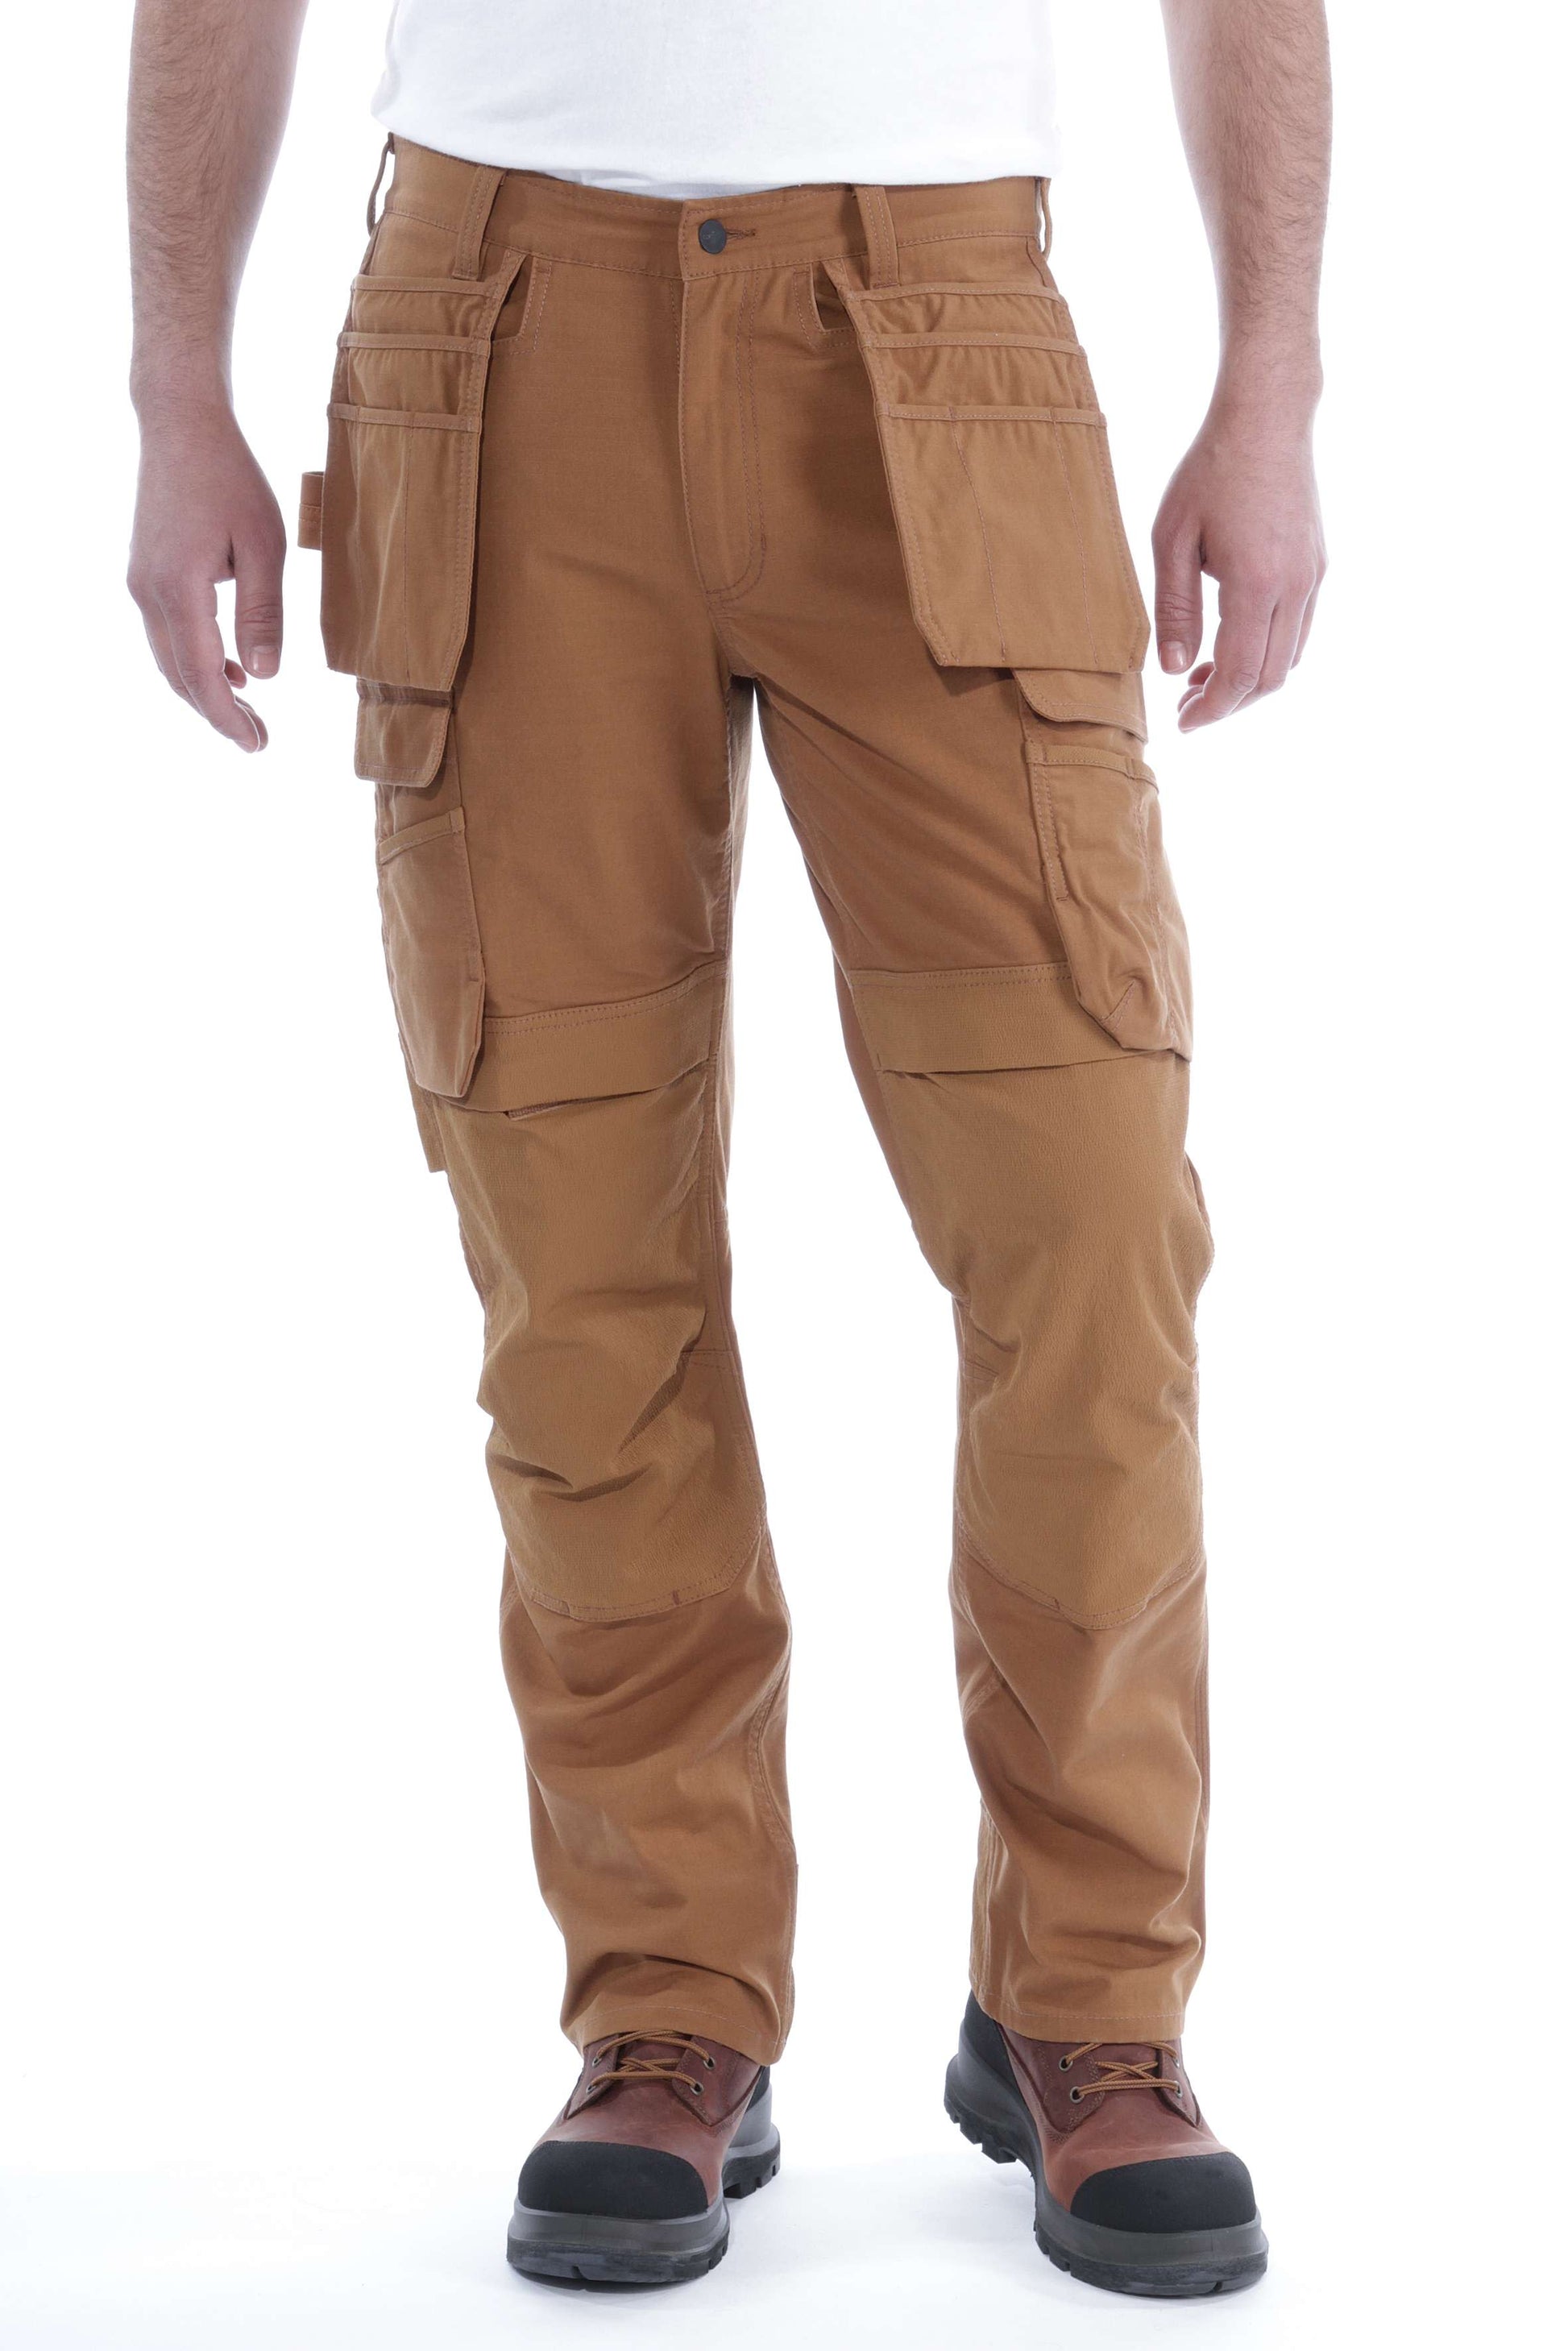 Carhartt 102802 Rugged Flex® Rigby Double-Front Pants - Factory